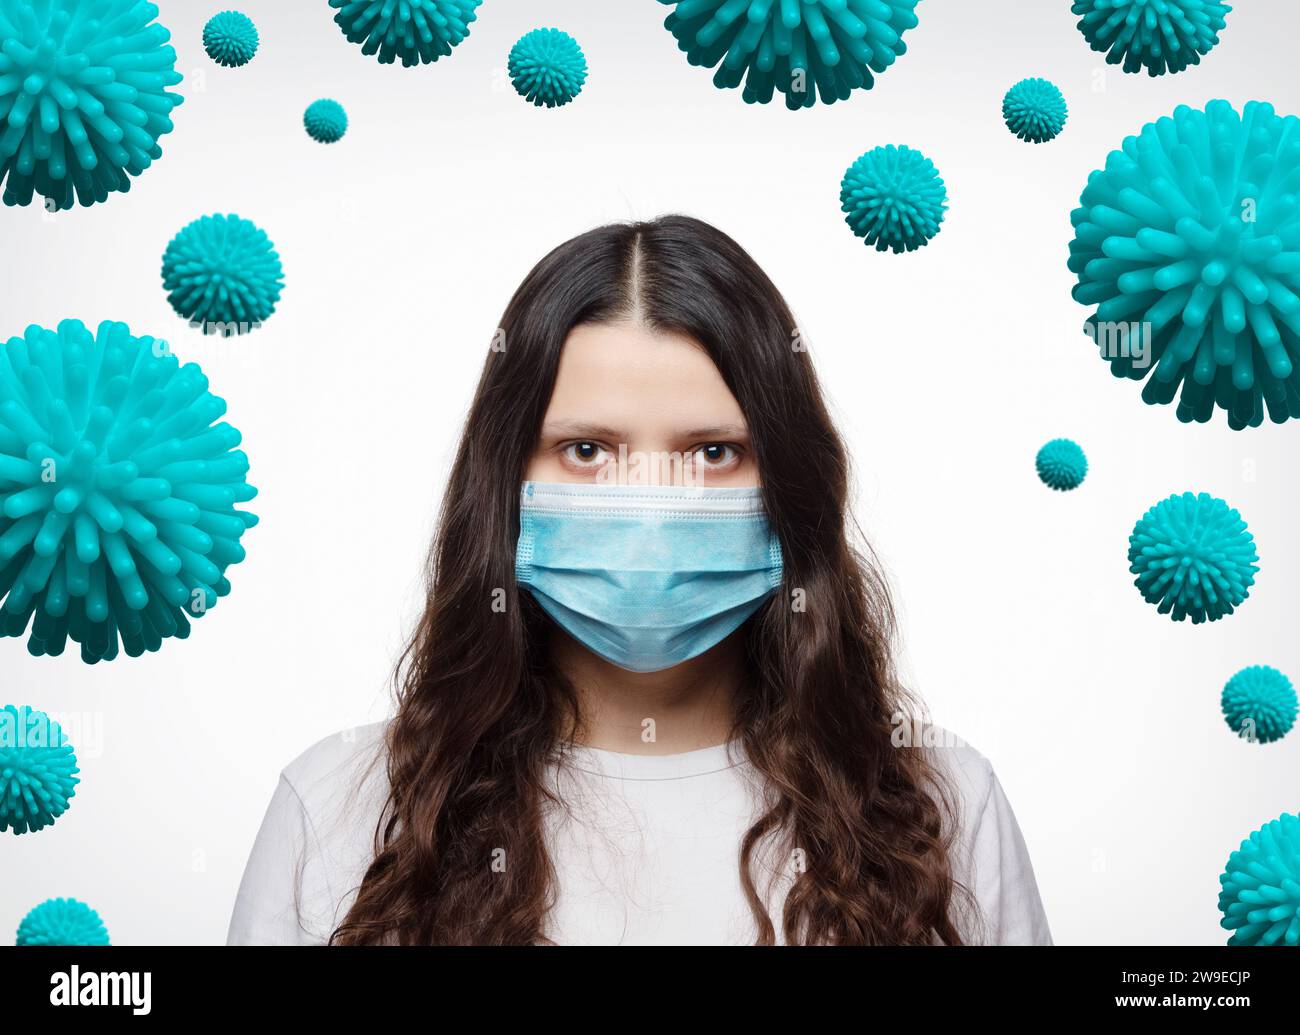 Covid-19 coronavirus infection spread concept. Portrait of a girl in a protective mask surrounded by bacteria of the coronavirus on white background. Stock Photo